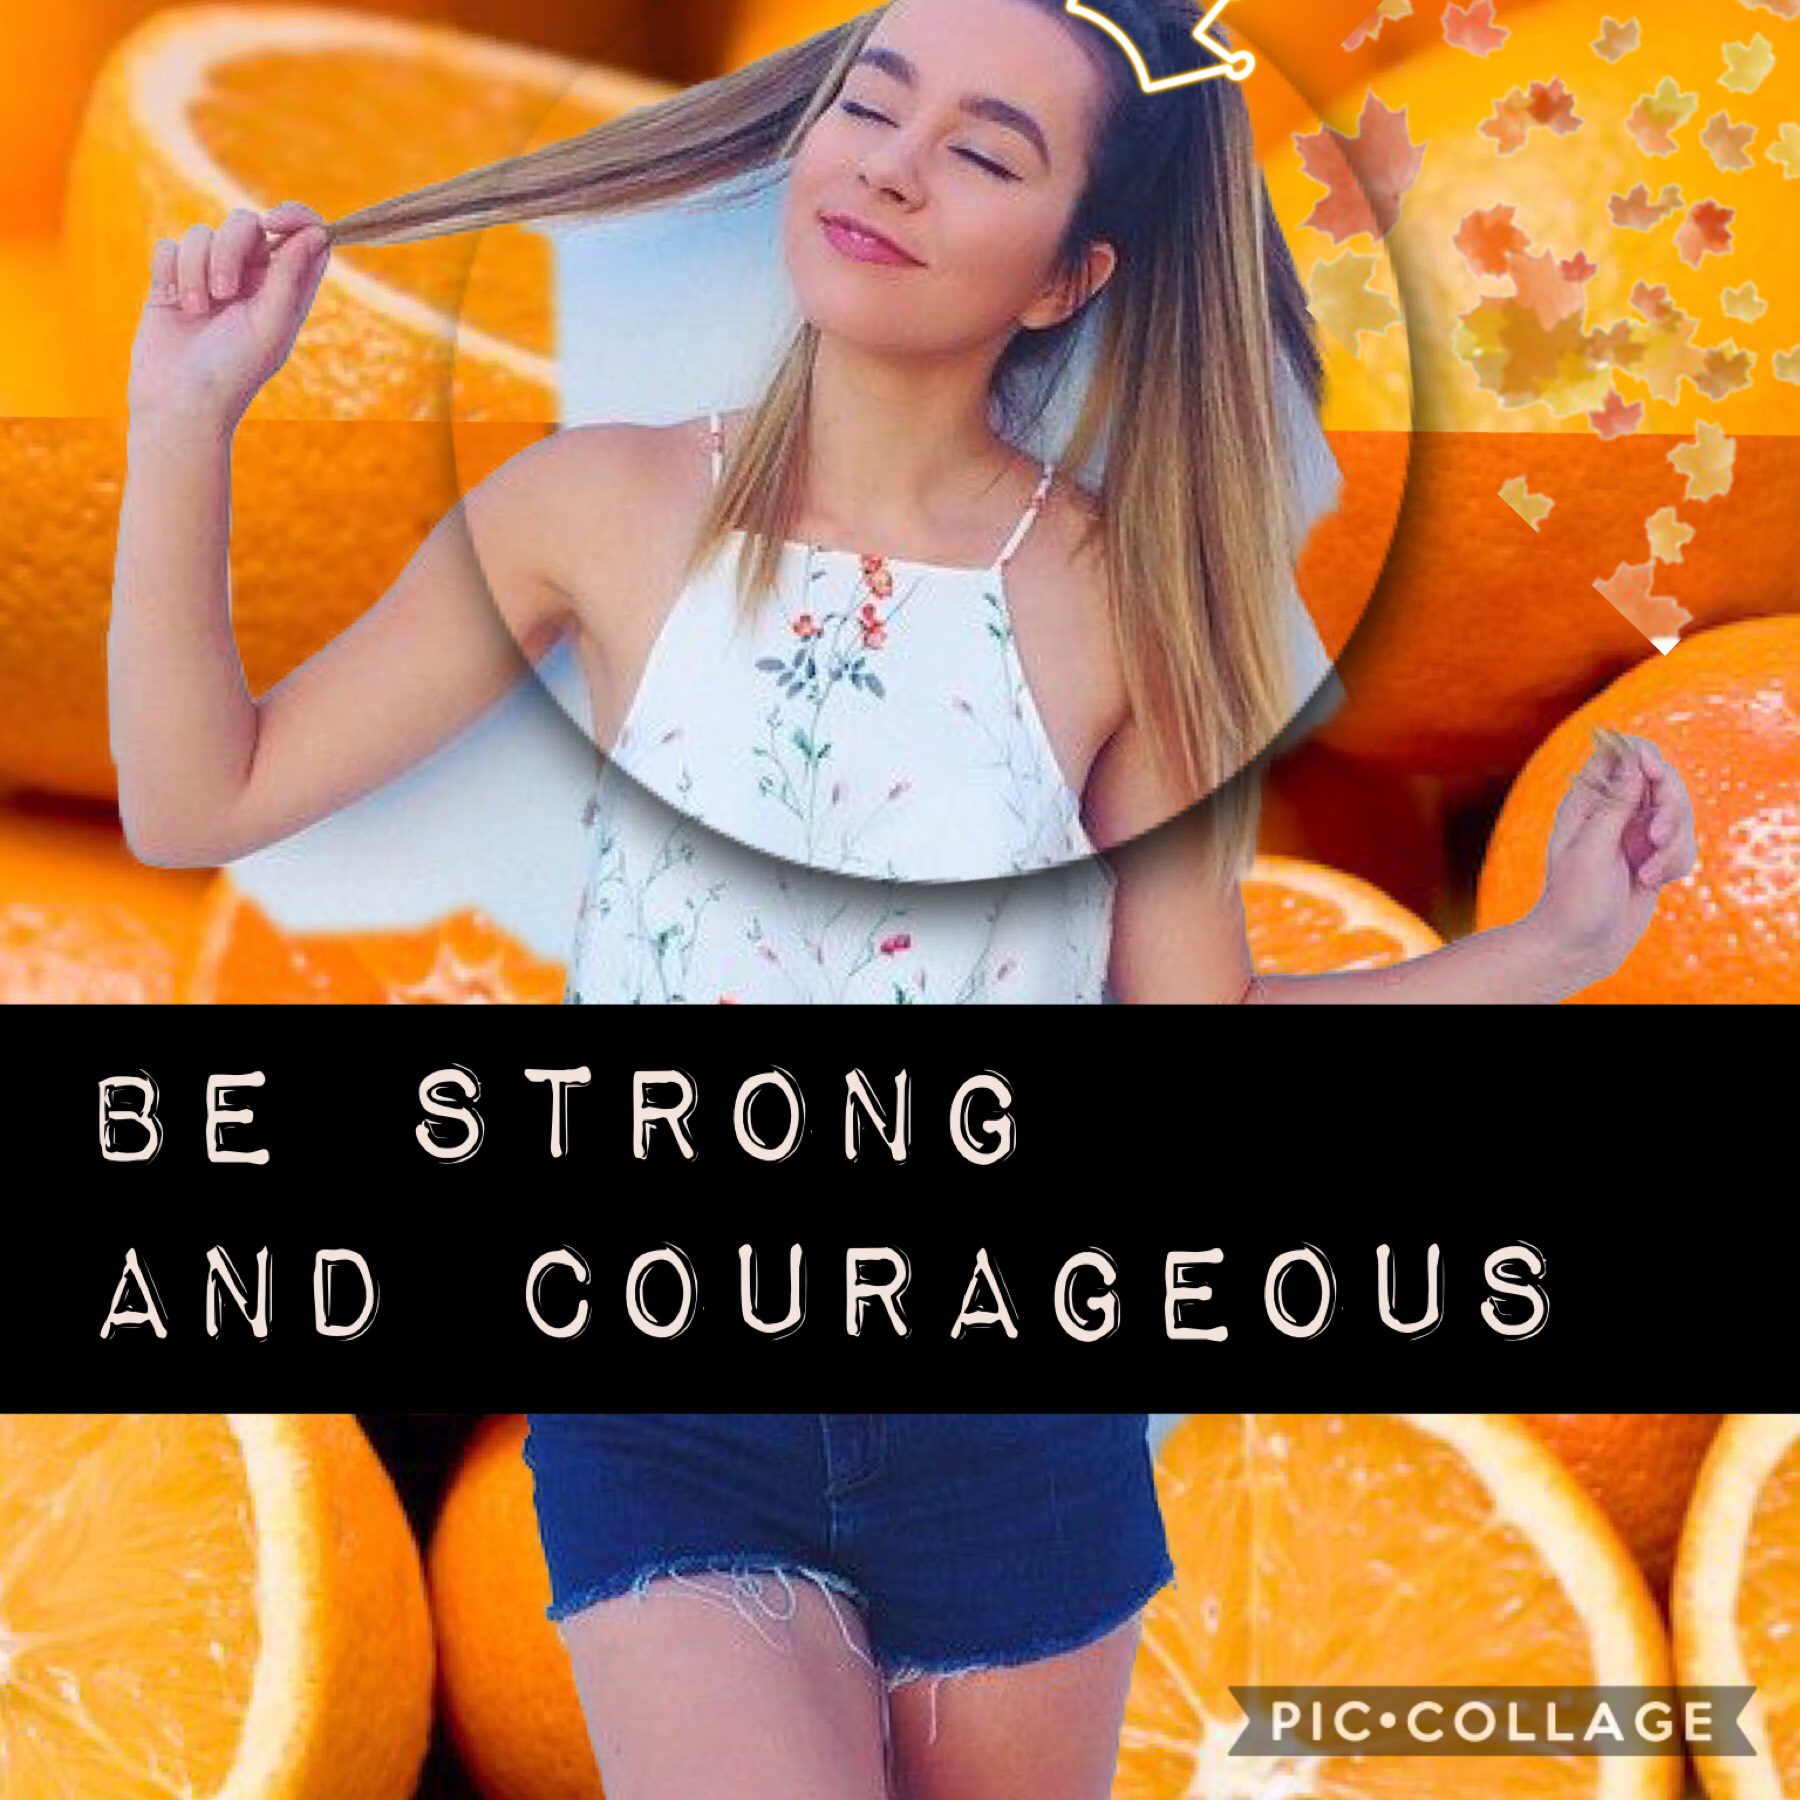 Be strong and courageous!! 
QOTD: WHO is your favorite YouTuber??
A: IDK I like a lott😂😂😂


